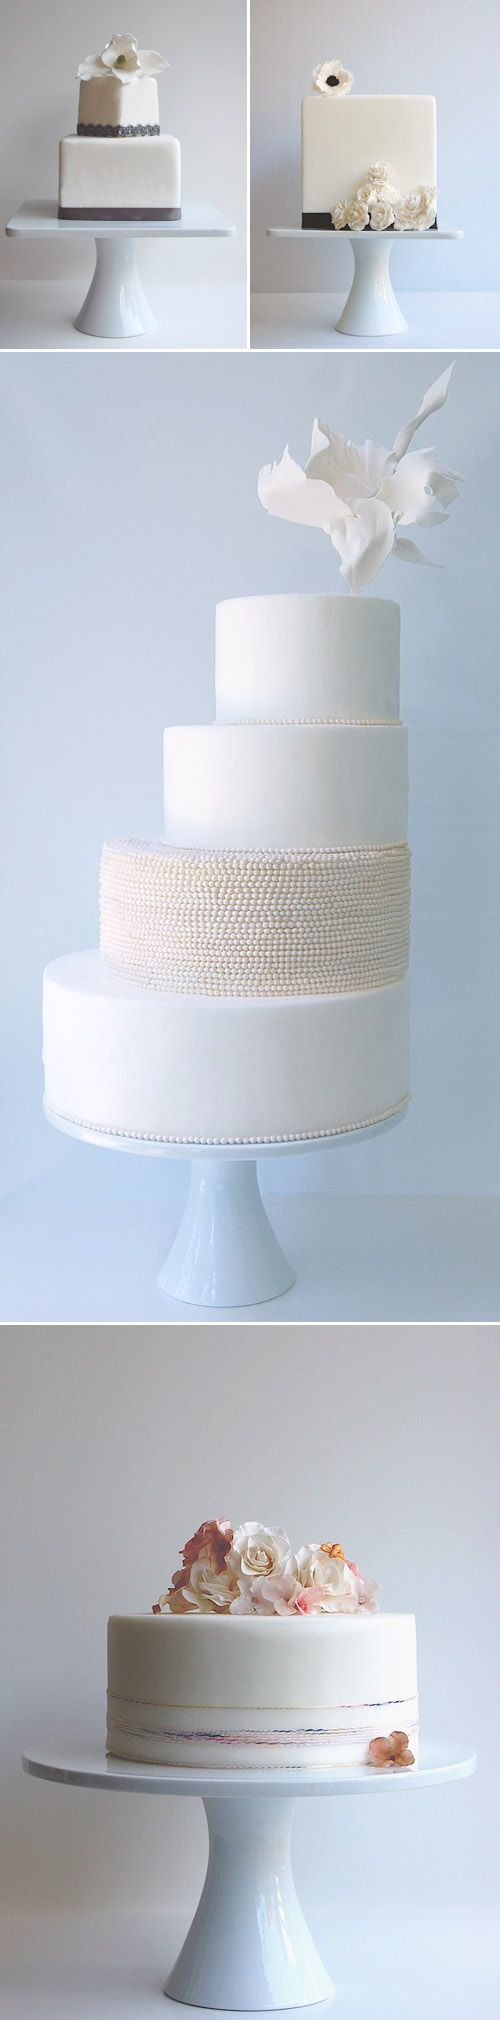 Wedding - Couture Wedding Cake Creations From Maggie Austin Cakes